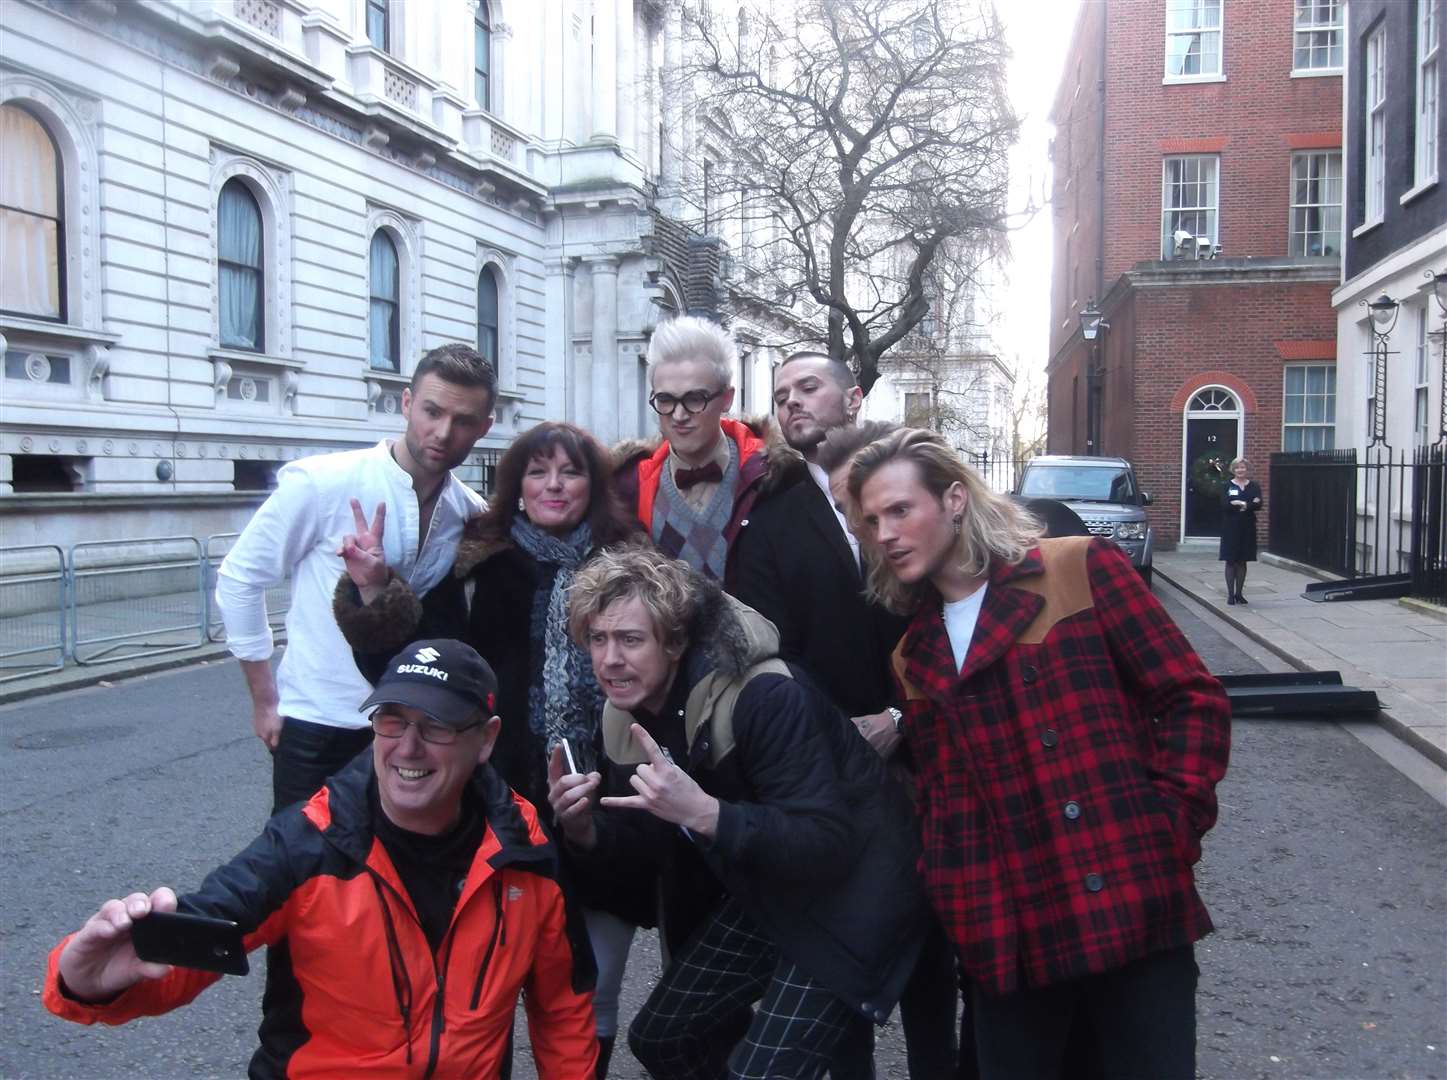 East Kent Against Fracking campaigners bump into McBusted outside Downing Street